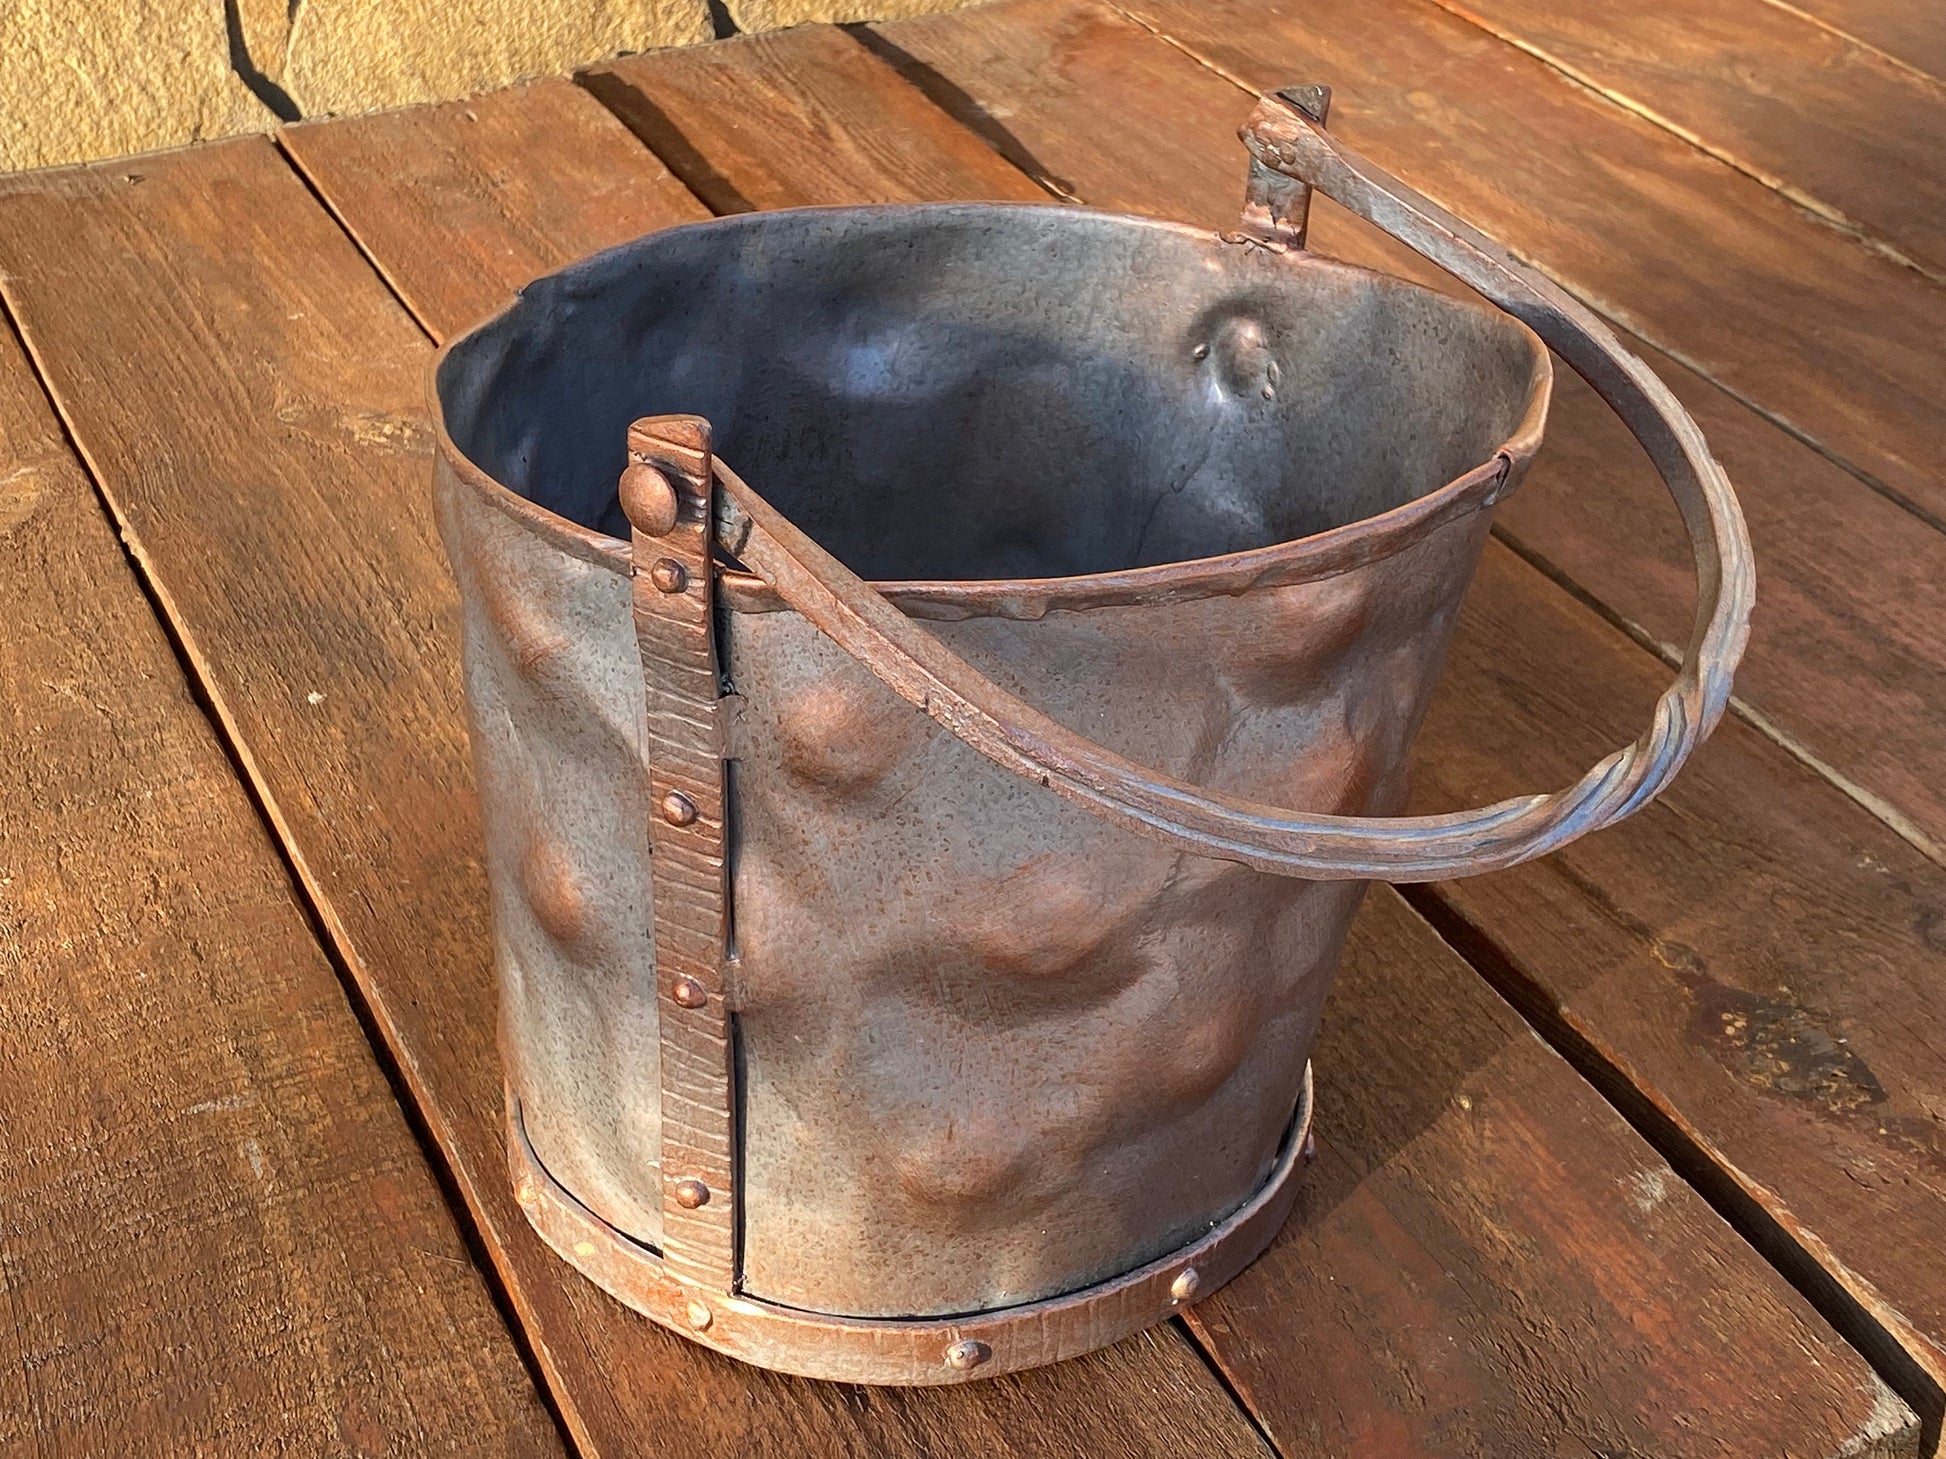 Bucket, firewood bucket, fireplace, firewood holder, fire poker, fire pit, birthday, Christmas, anniversary, Fathers Day, BBQ, grilling, dad